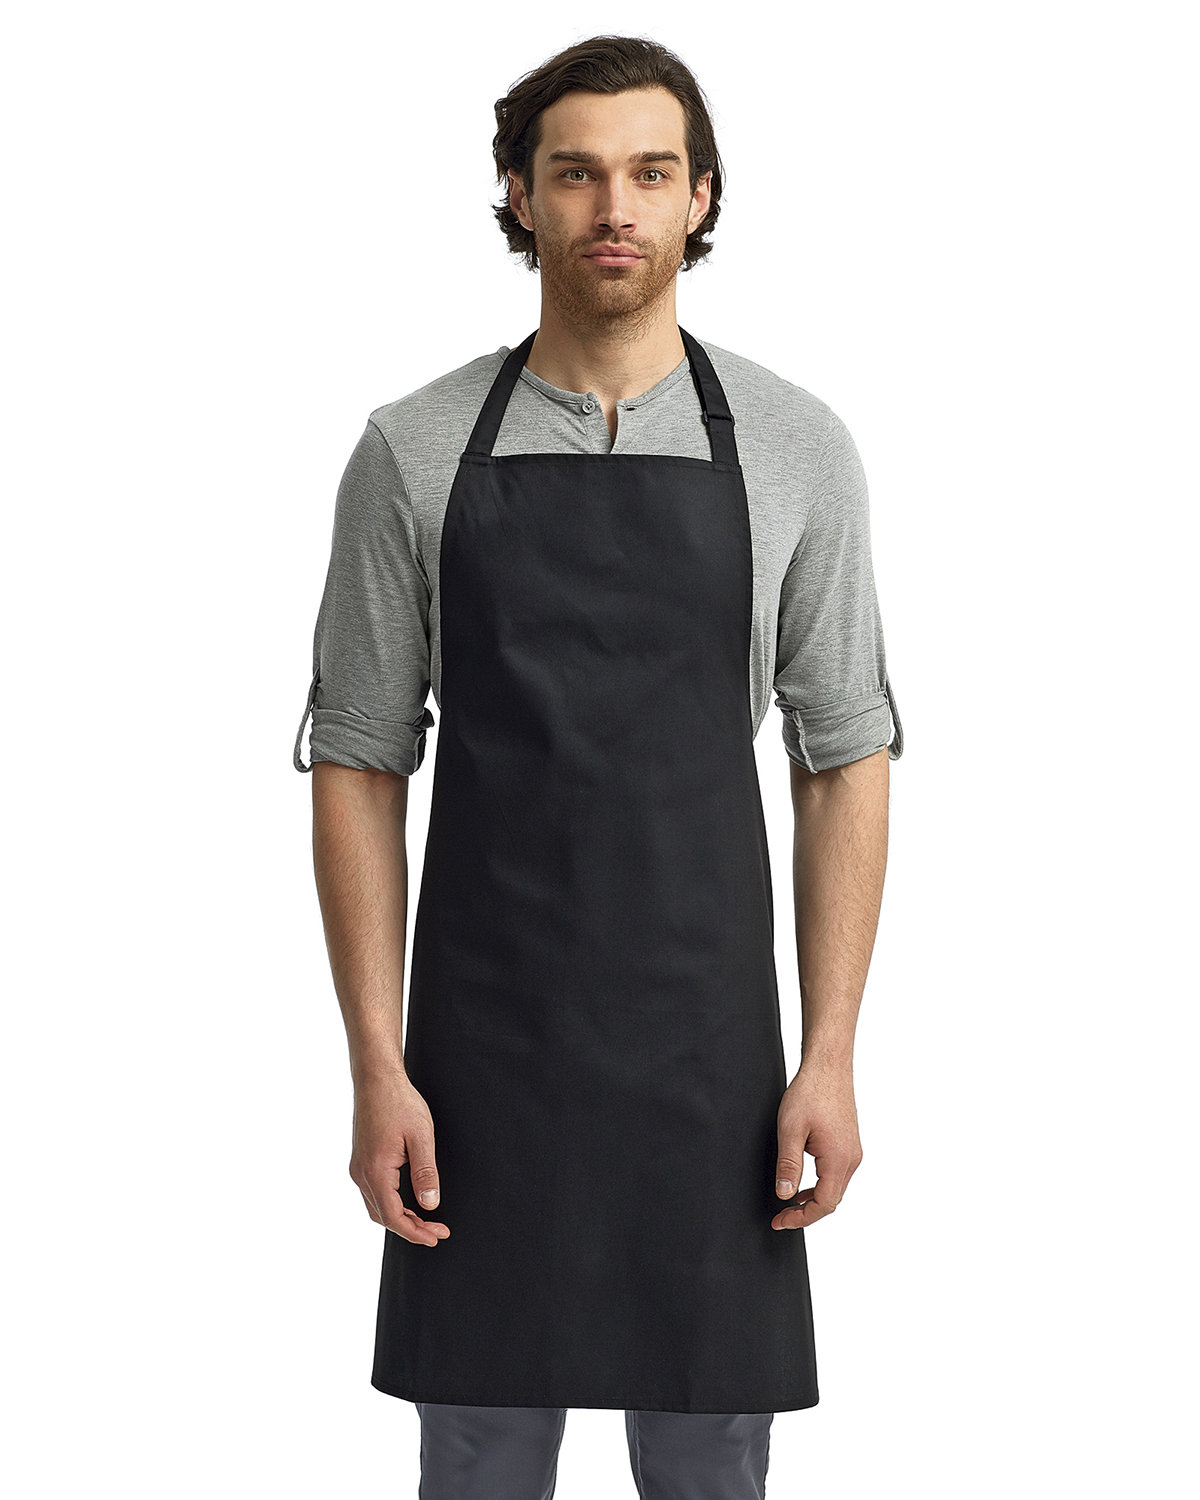 Artisan Collection by Reprime "Colours" Sustainable Bib Apron BLACK 